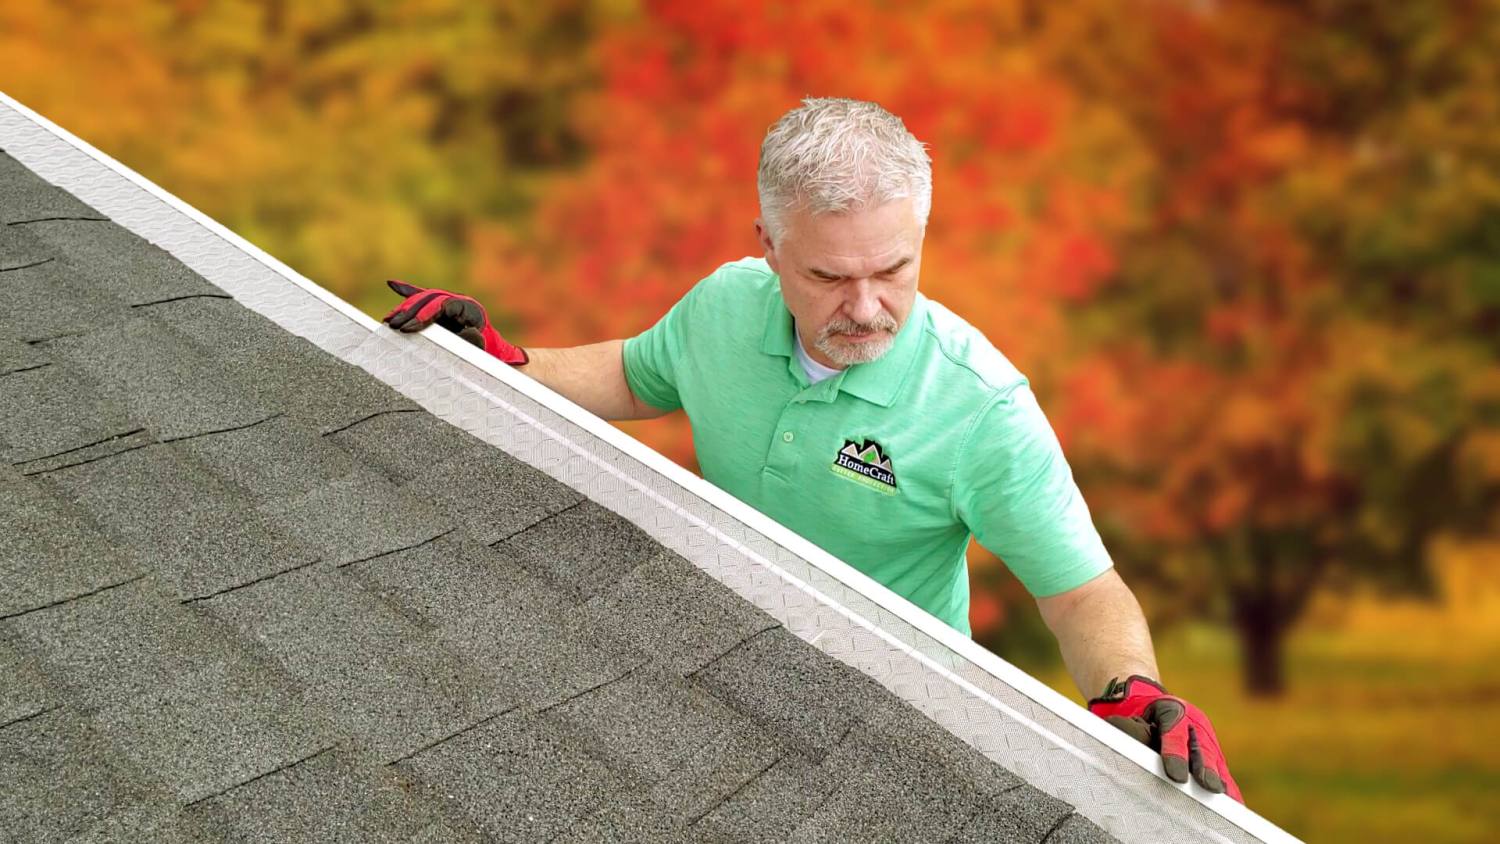 Get your gutter covers installed by HomeCraft!